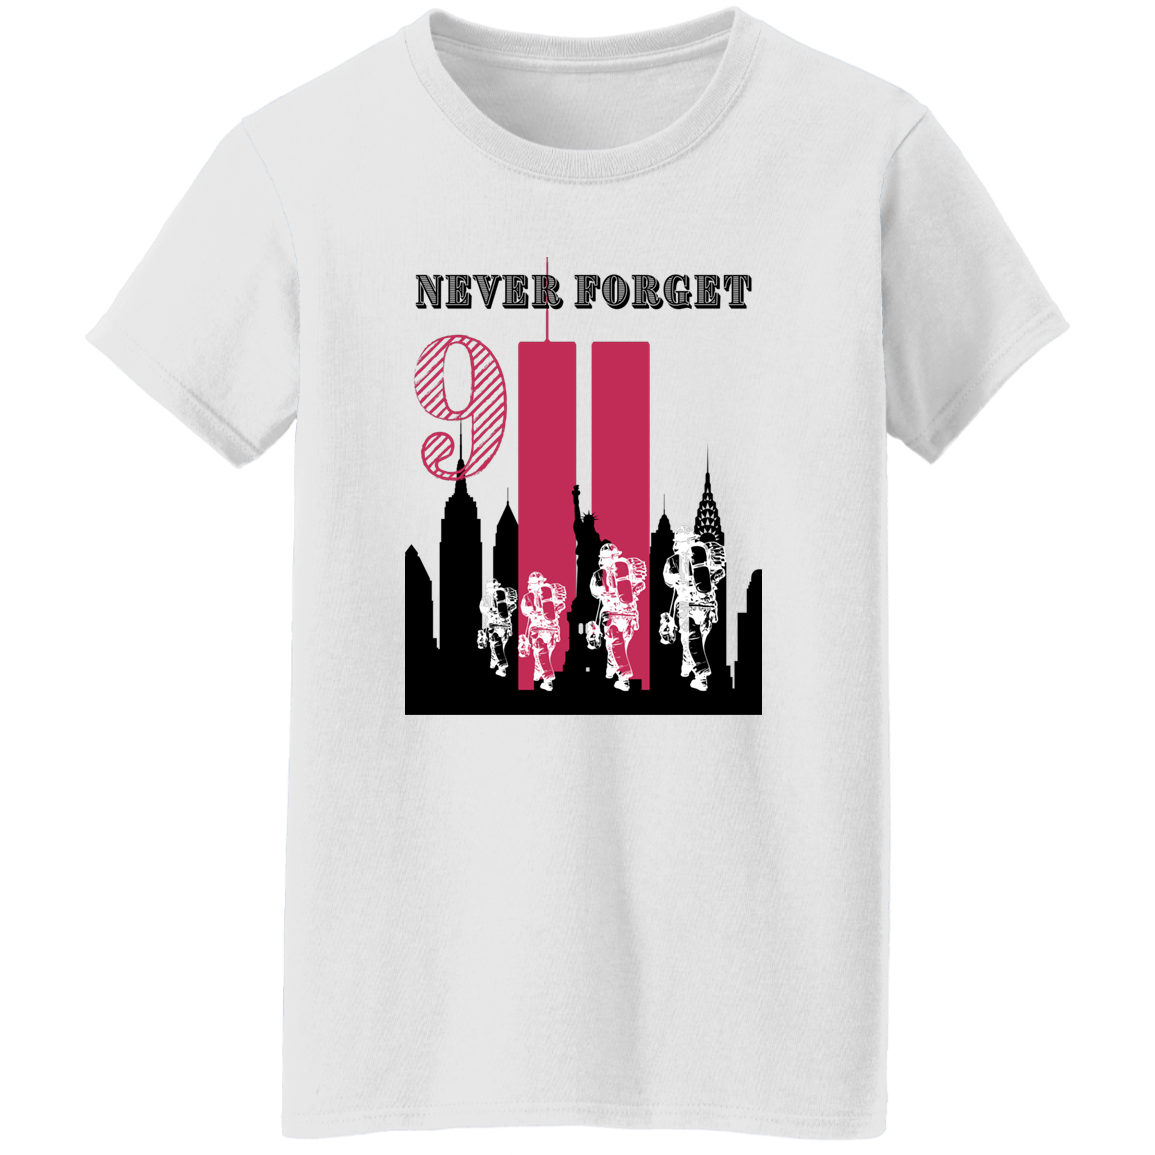 NEVER FORGET  Ladies' 5.3 oz. T-Shirt